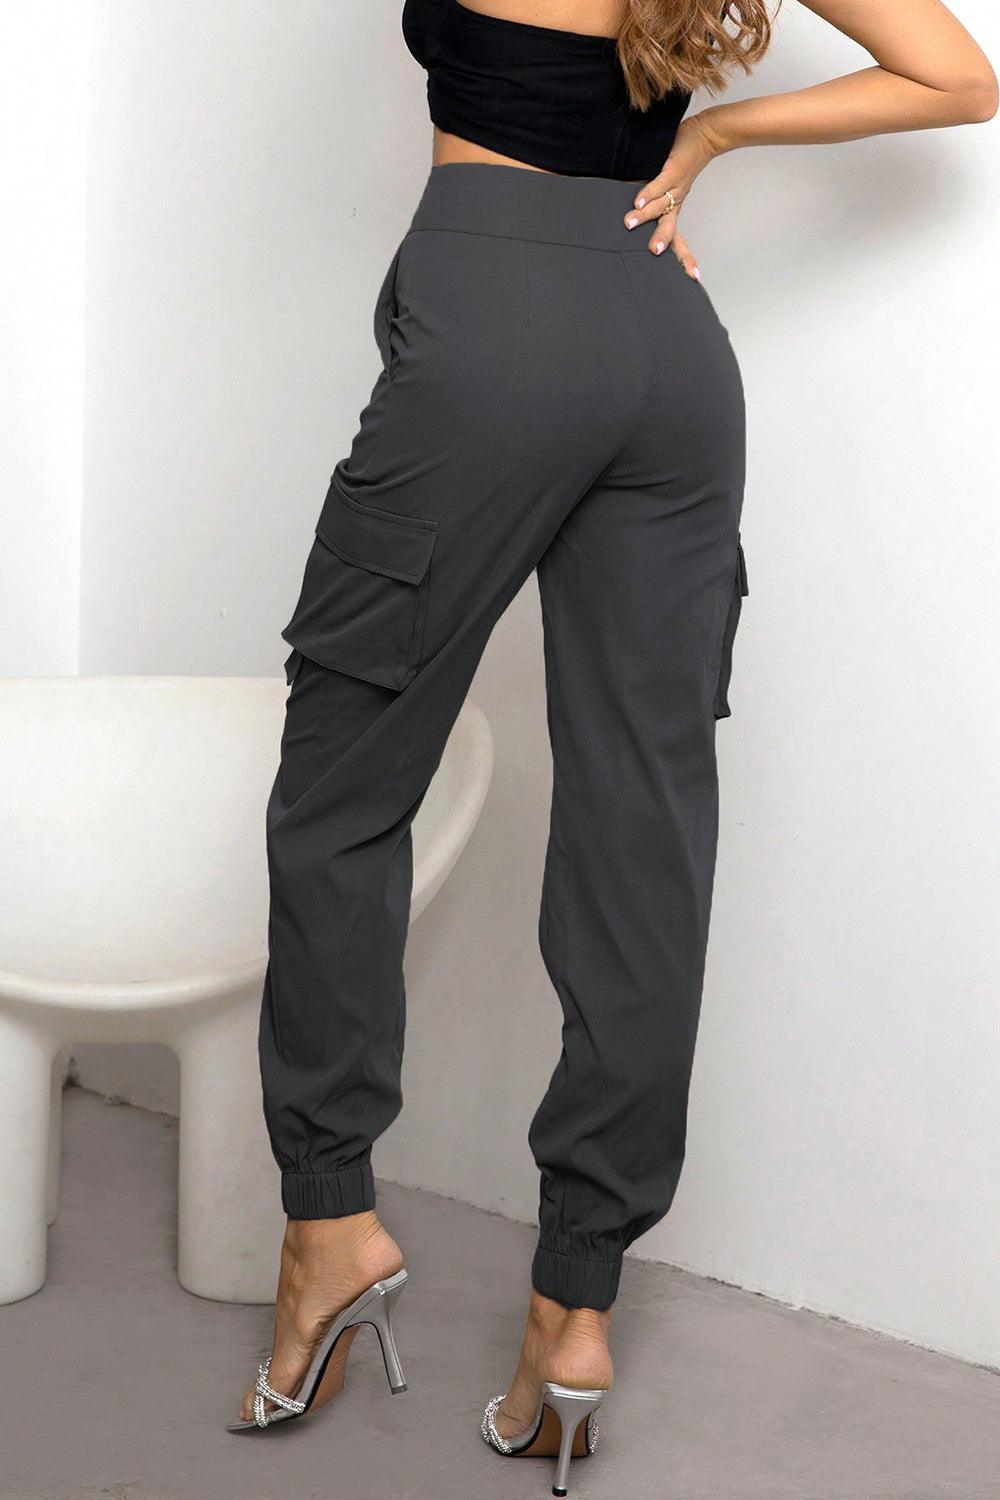 High Waist Cargo Pants - Anchored Feather Boutique